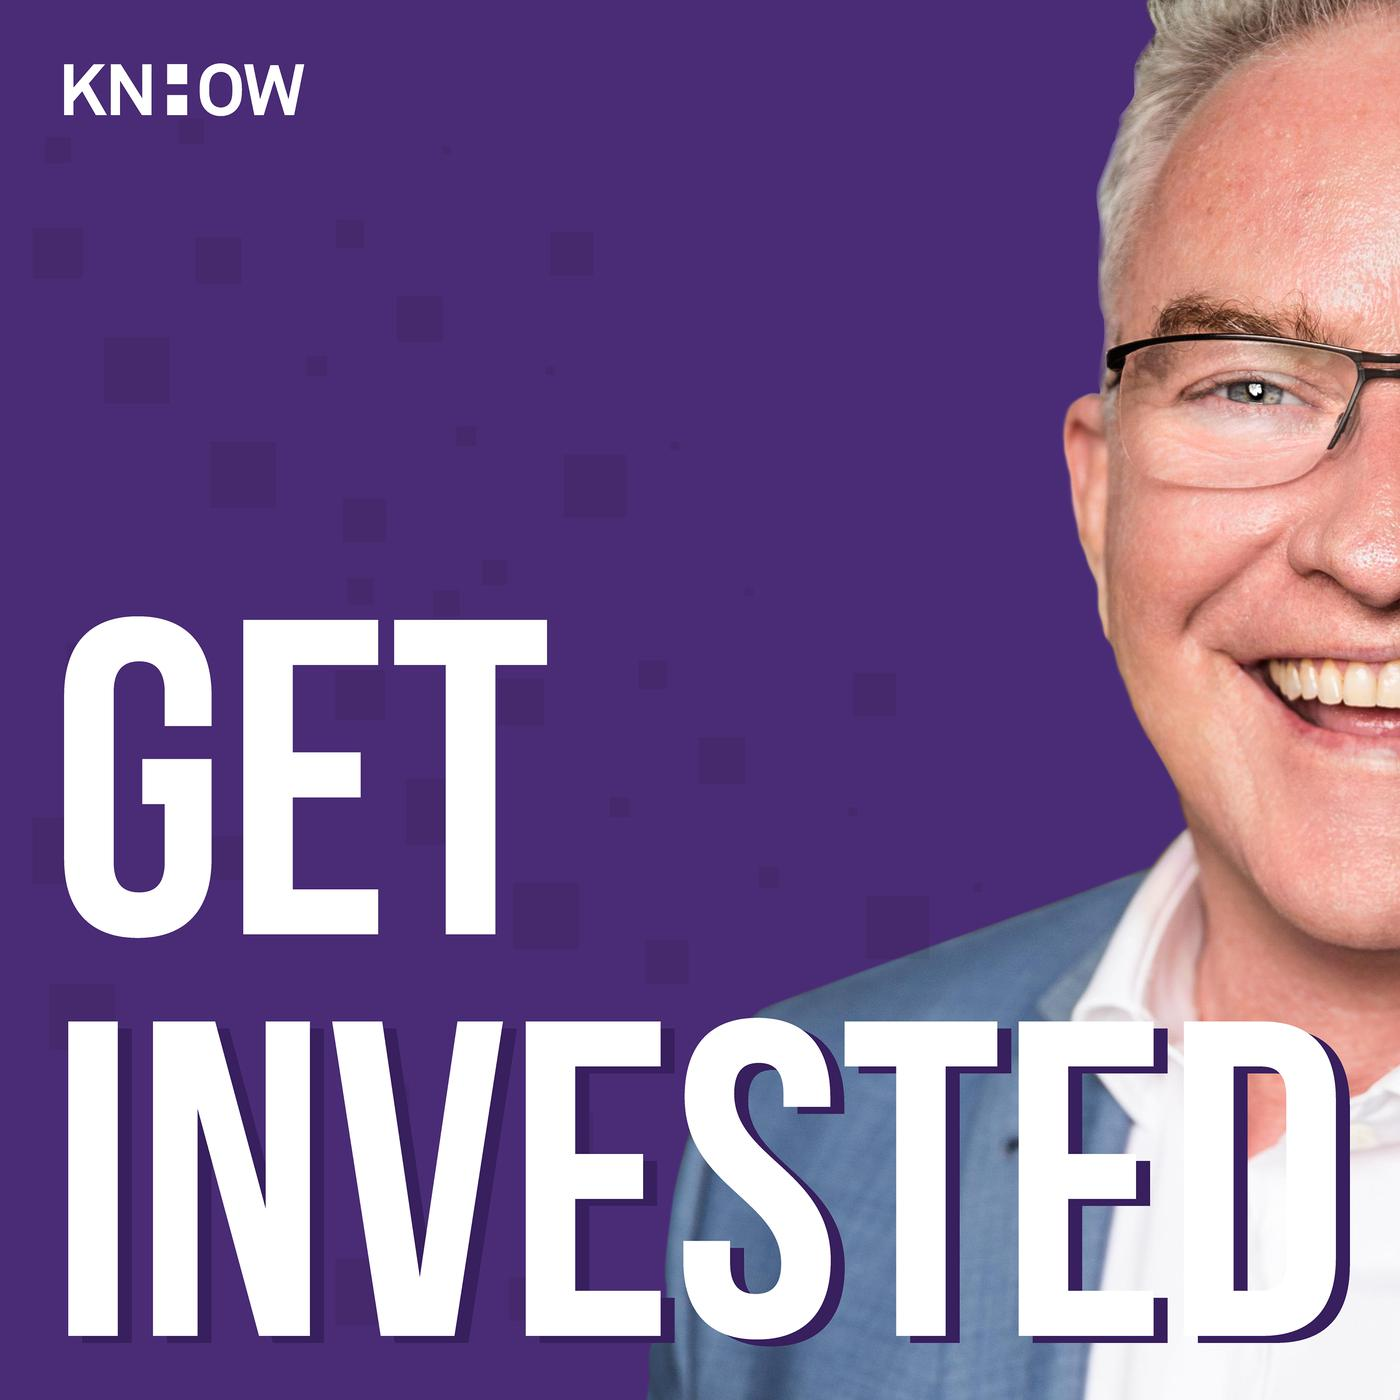 Get Invested: Matt Raad on investing in digital property